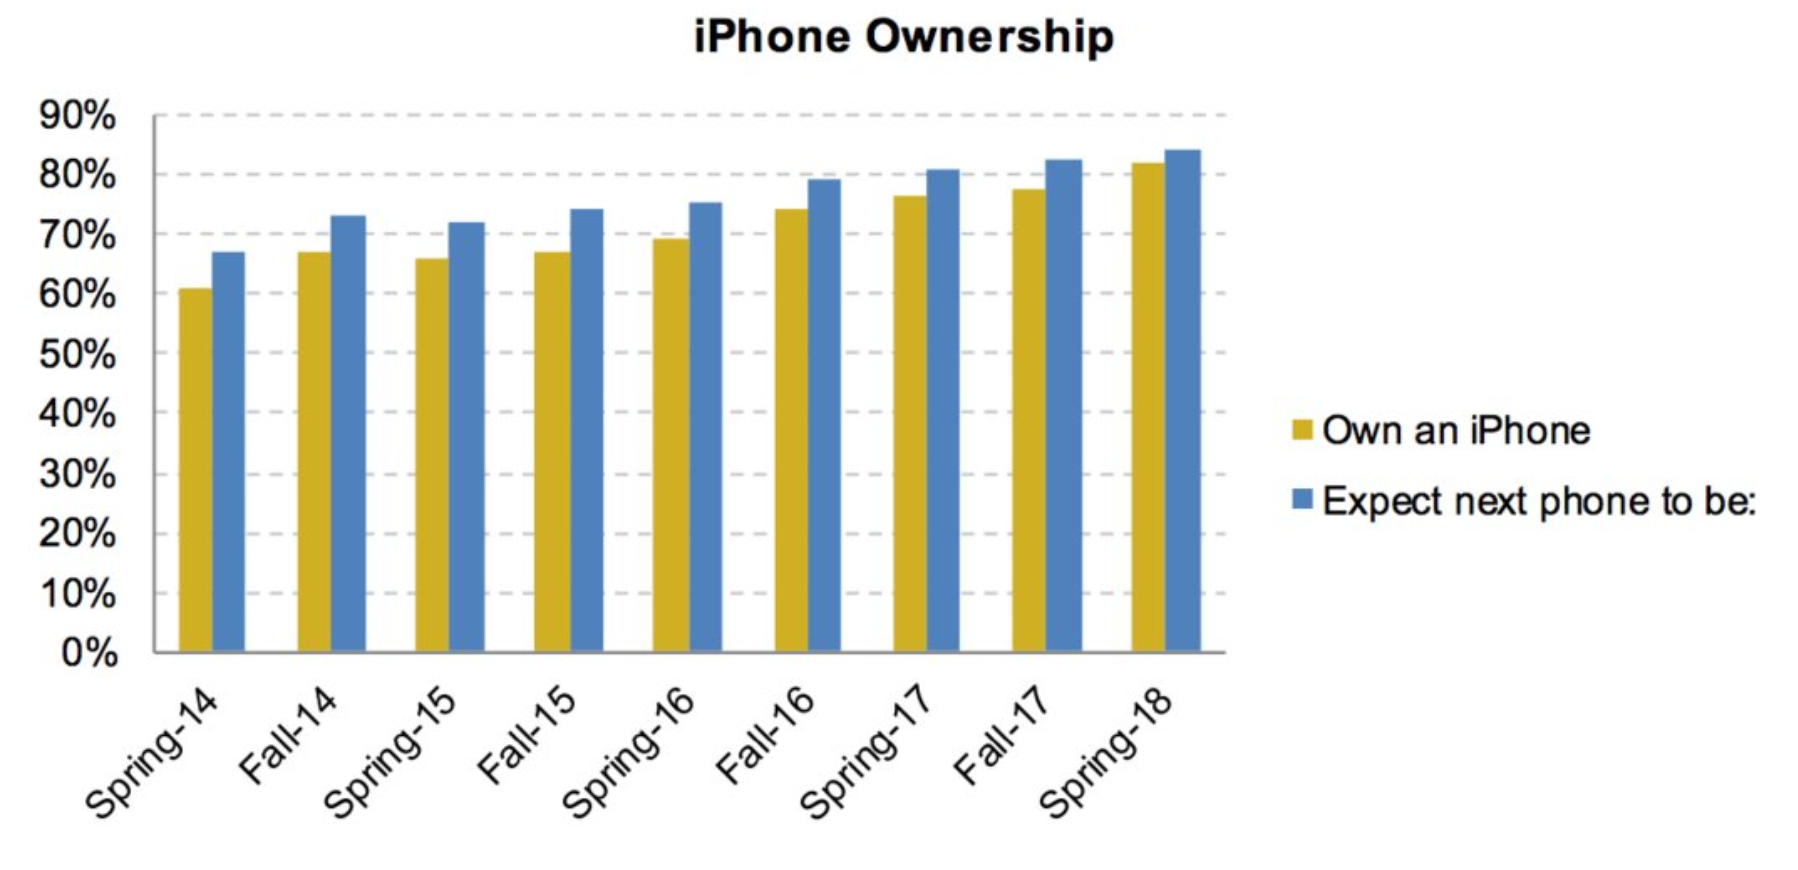 82% of teens own an Apple iPhone according to survey - Piper Jaffray survey finds that 82% of teens own an Apple iPhone